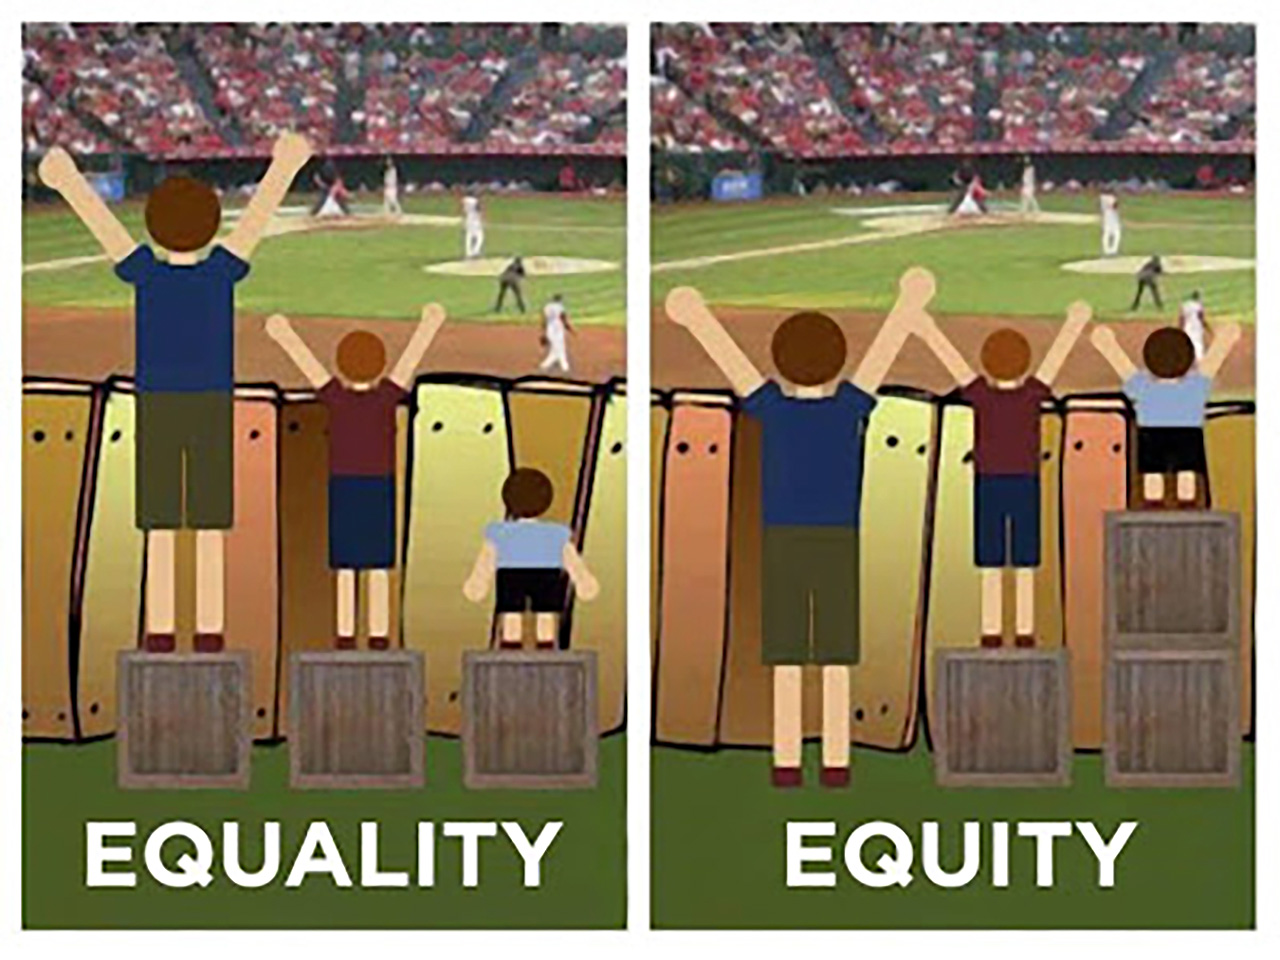 Equality vs. Equity image of children standing on boxes to watch a baseball game..